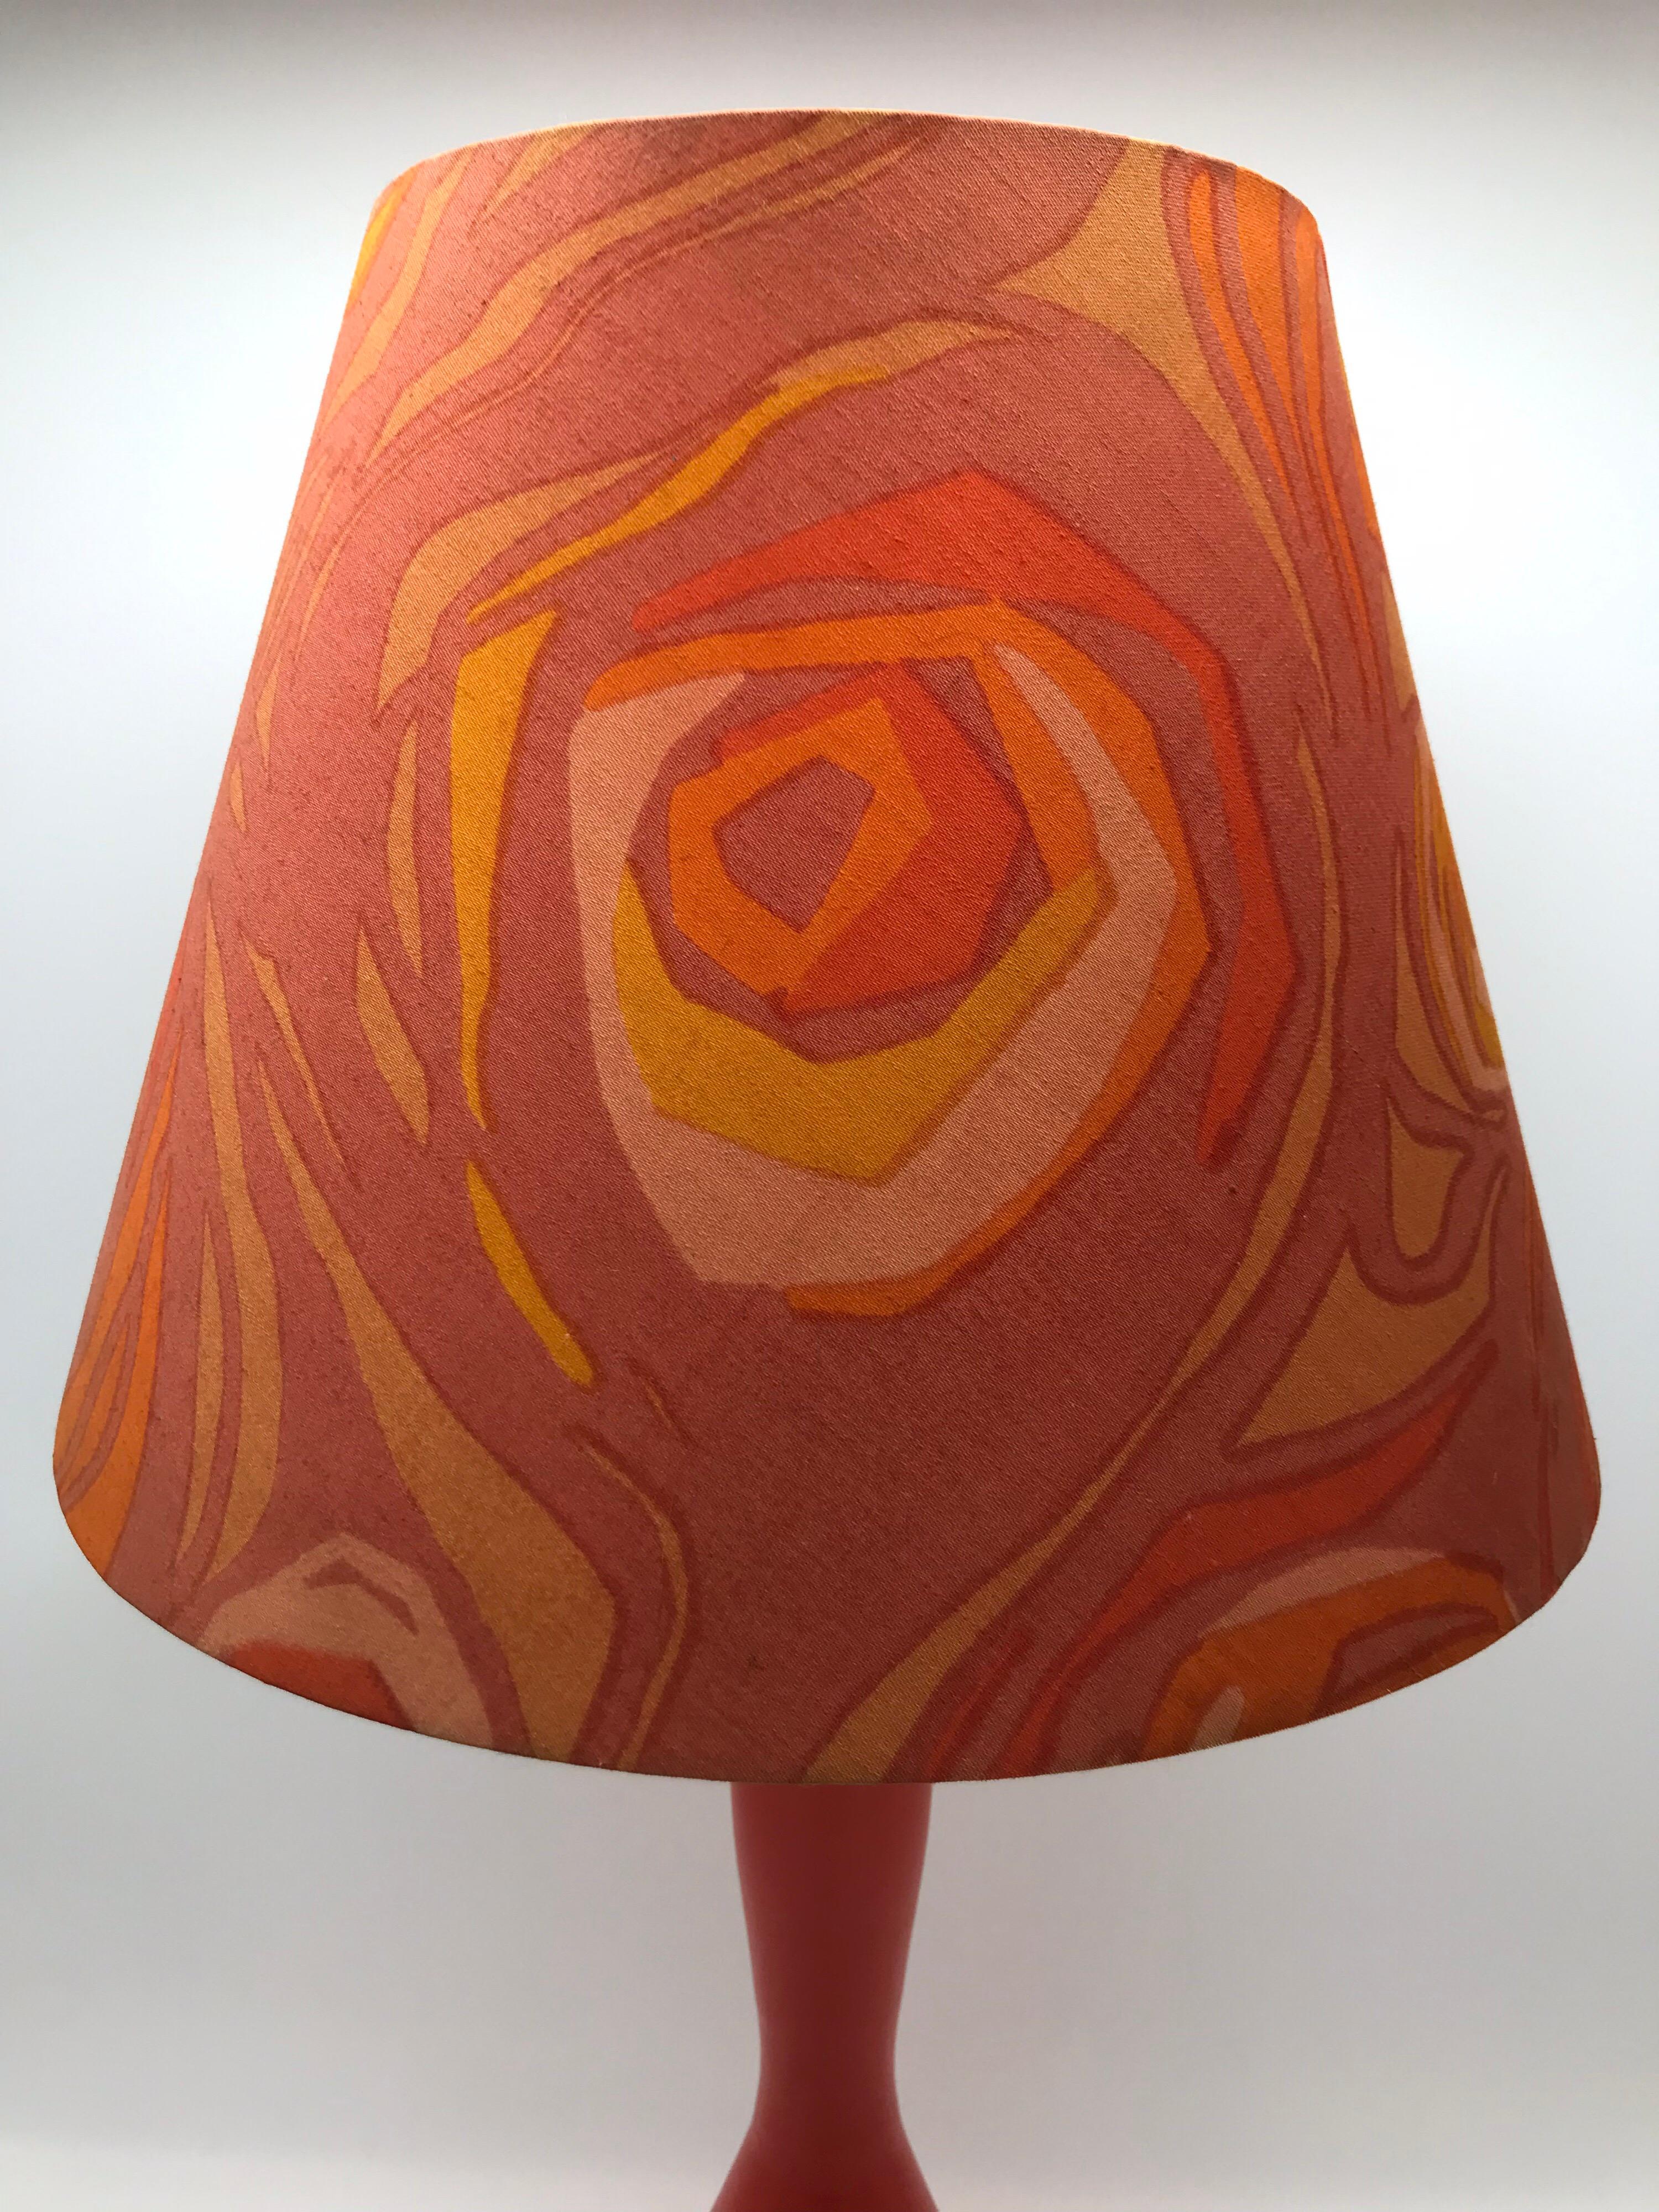 Hand-Crafted Stunning Retro Vintage Table Lamp from the 1960s Made by Kastrup Glass Denmark